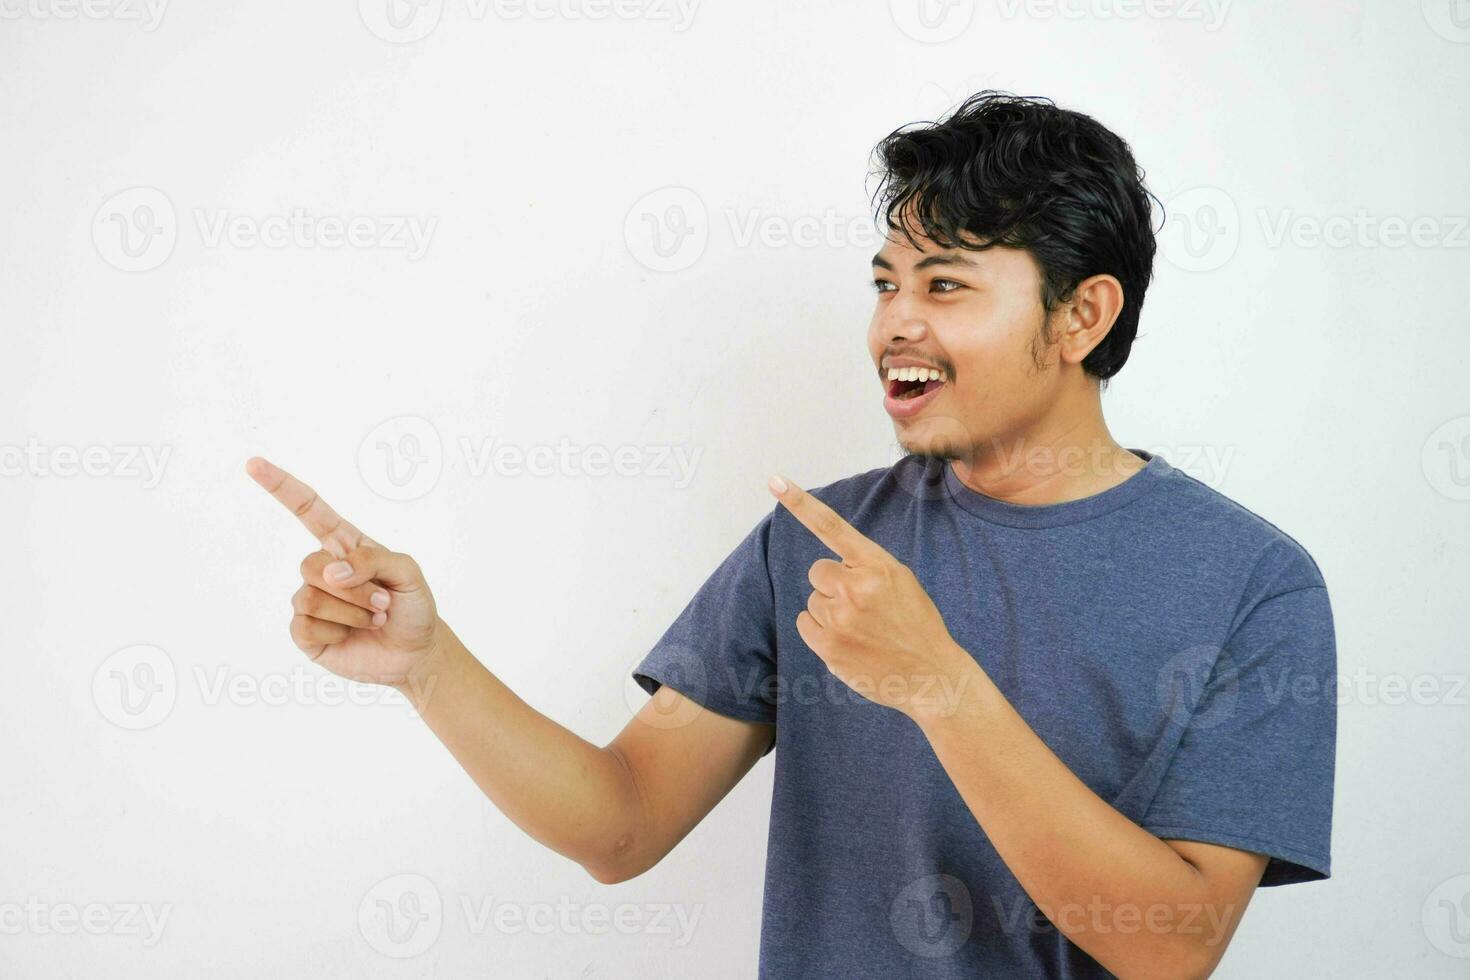 Smiling or happy handsome young Asian man with his finger pointing isolated on white background with copy space photo